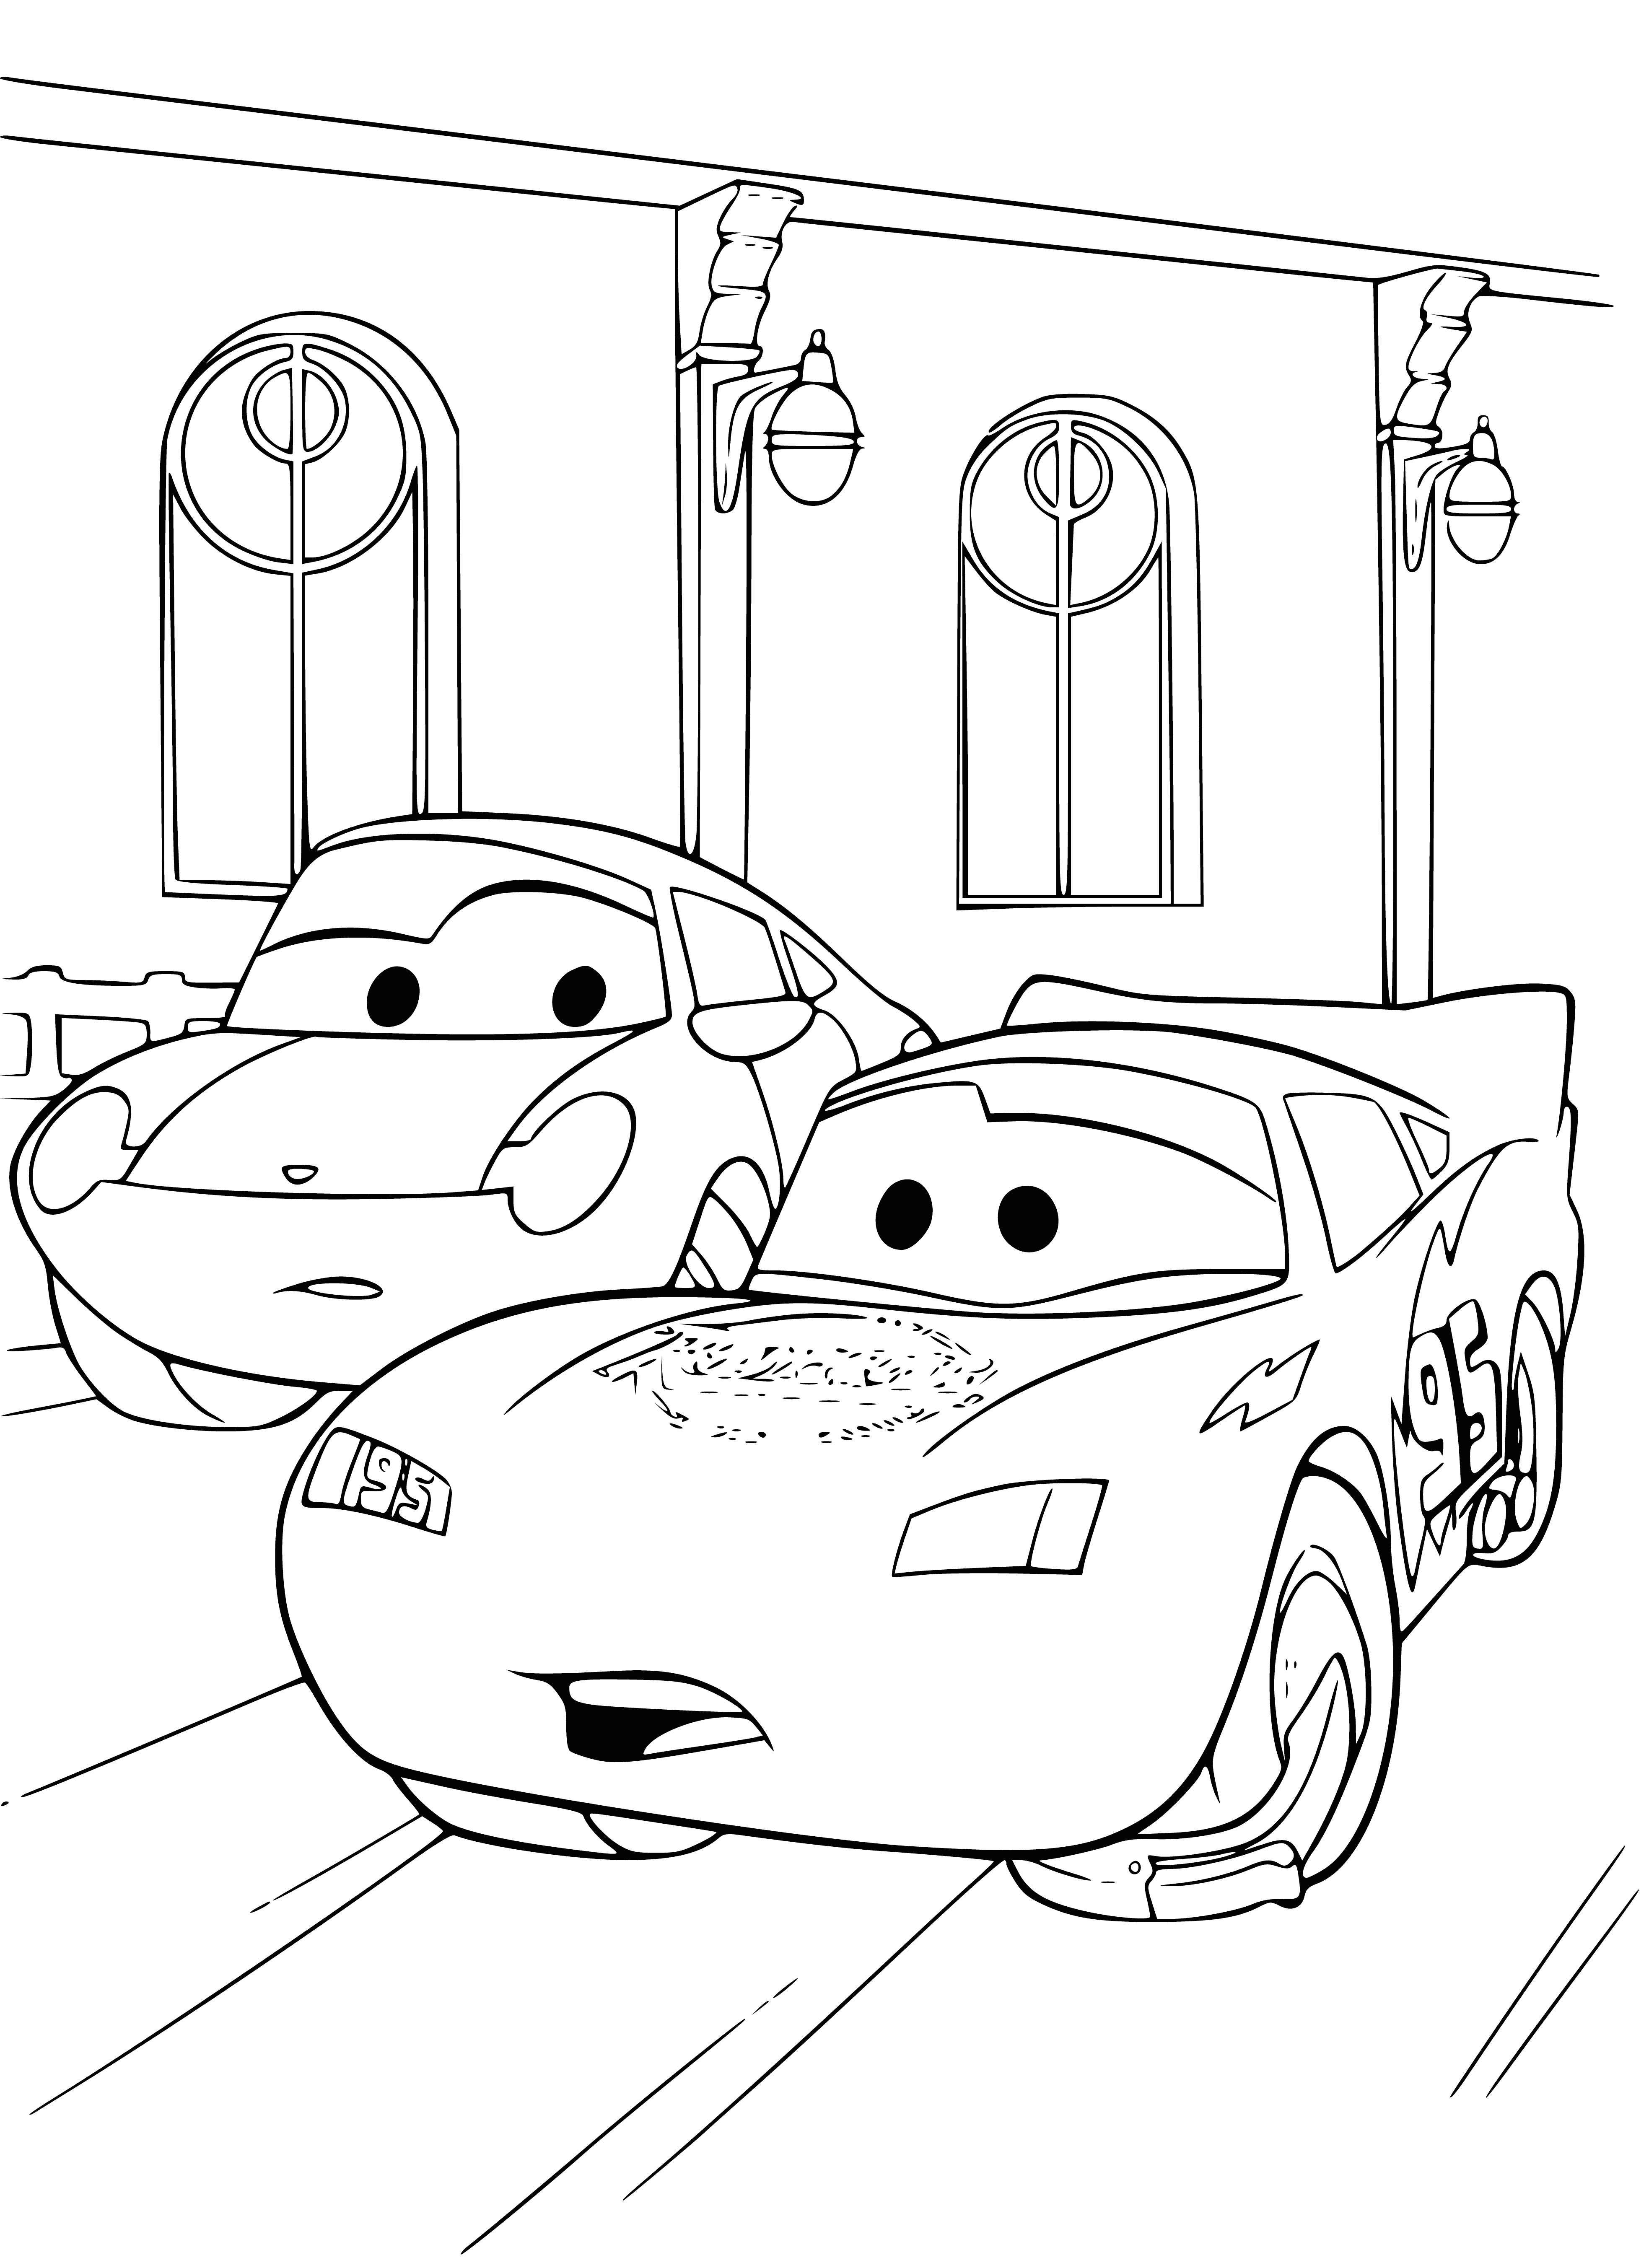 McQueen and Sally coloring page